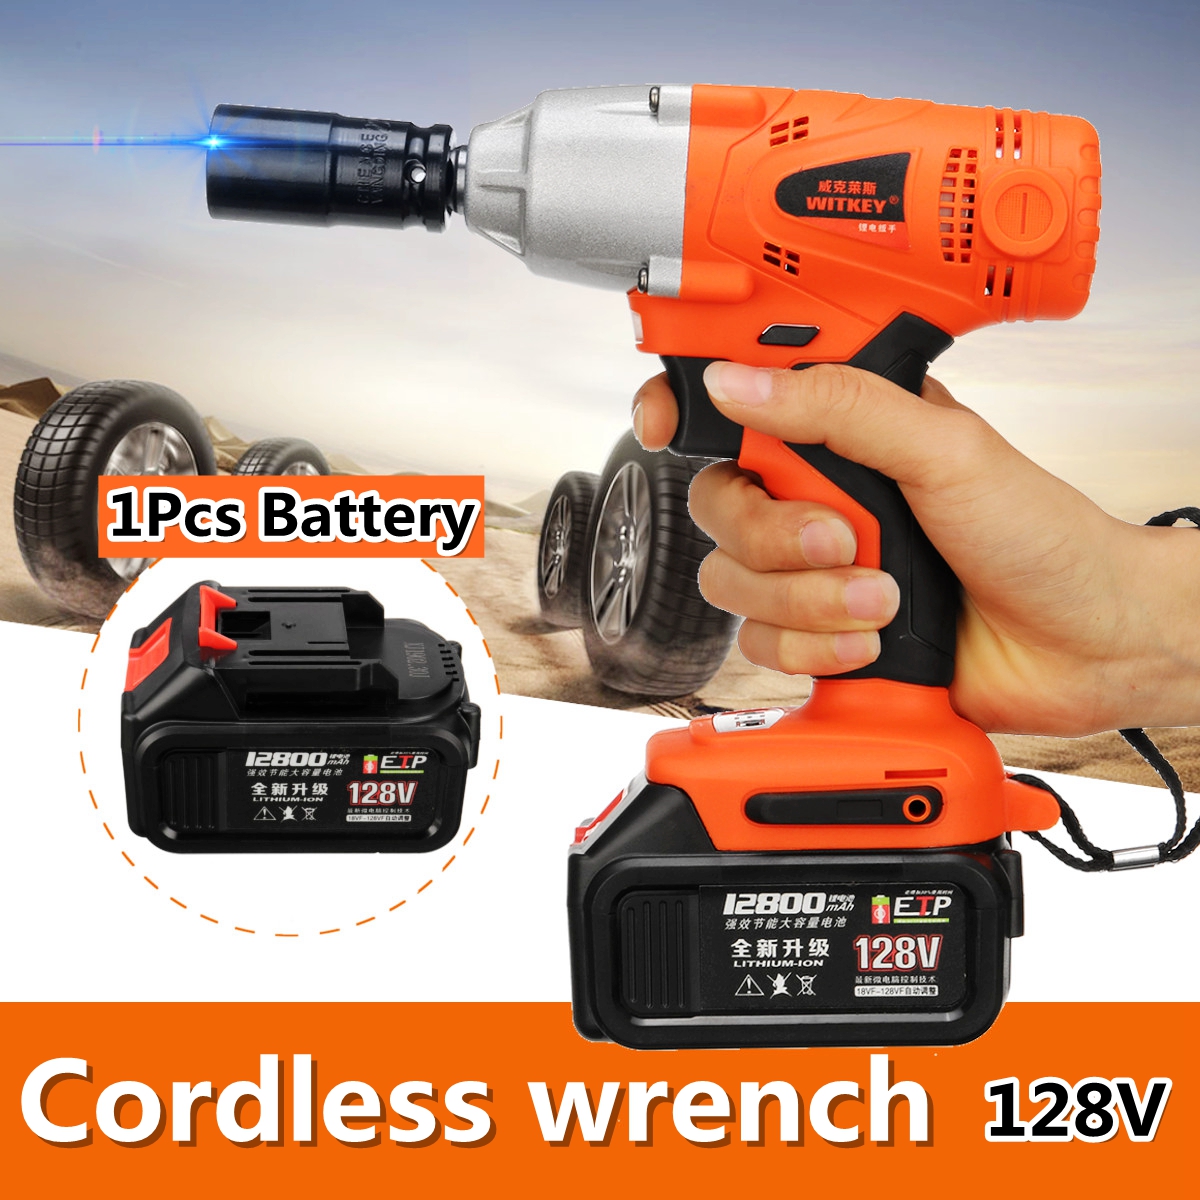 WK-128Y-2 128V Cordless Power Wrench Brush 520Nm Torque Electric Wrench Power Tools